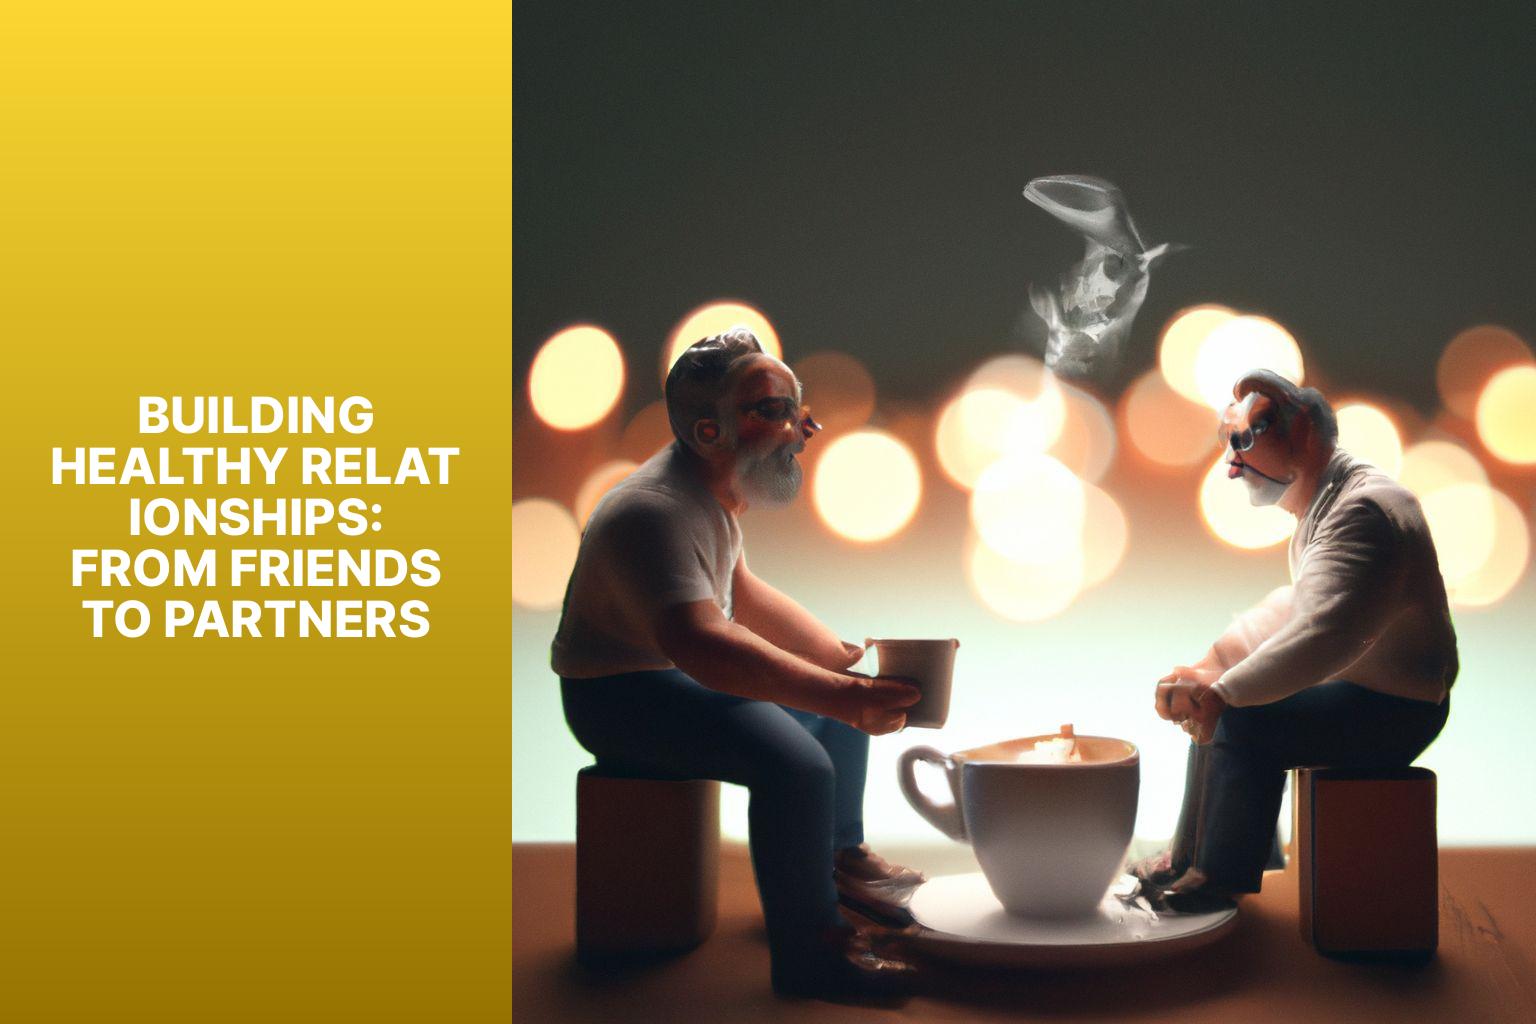 Building Healthy Relationships: From Friends to Partners - Men